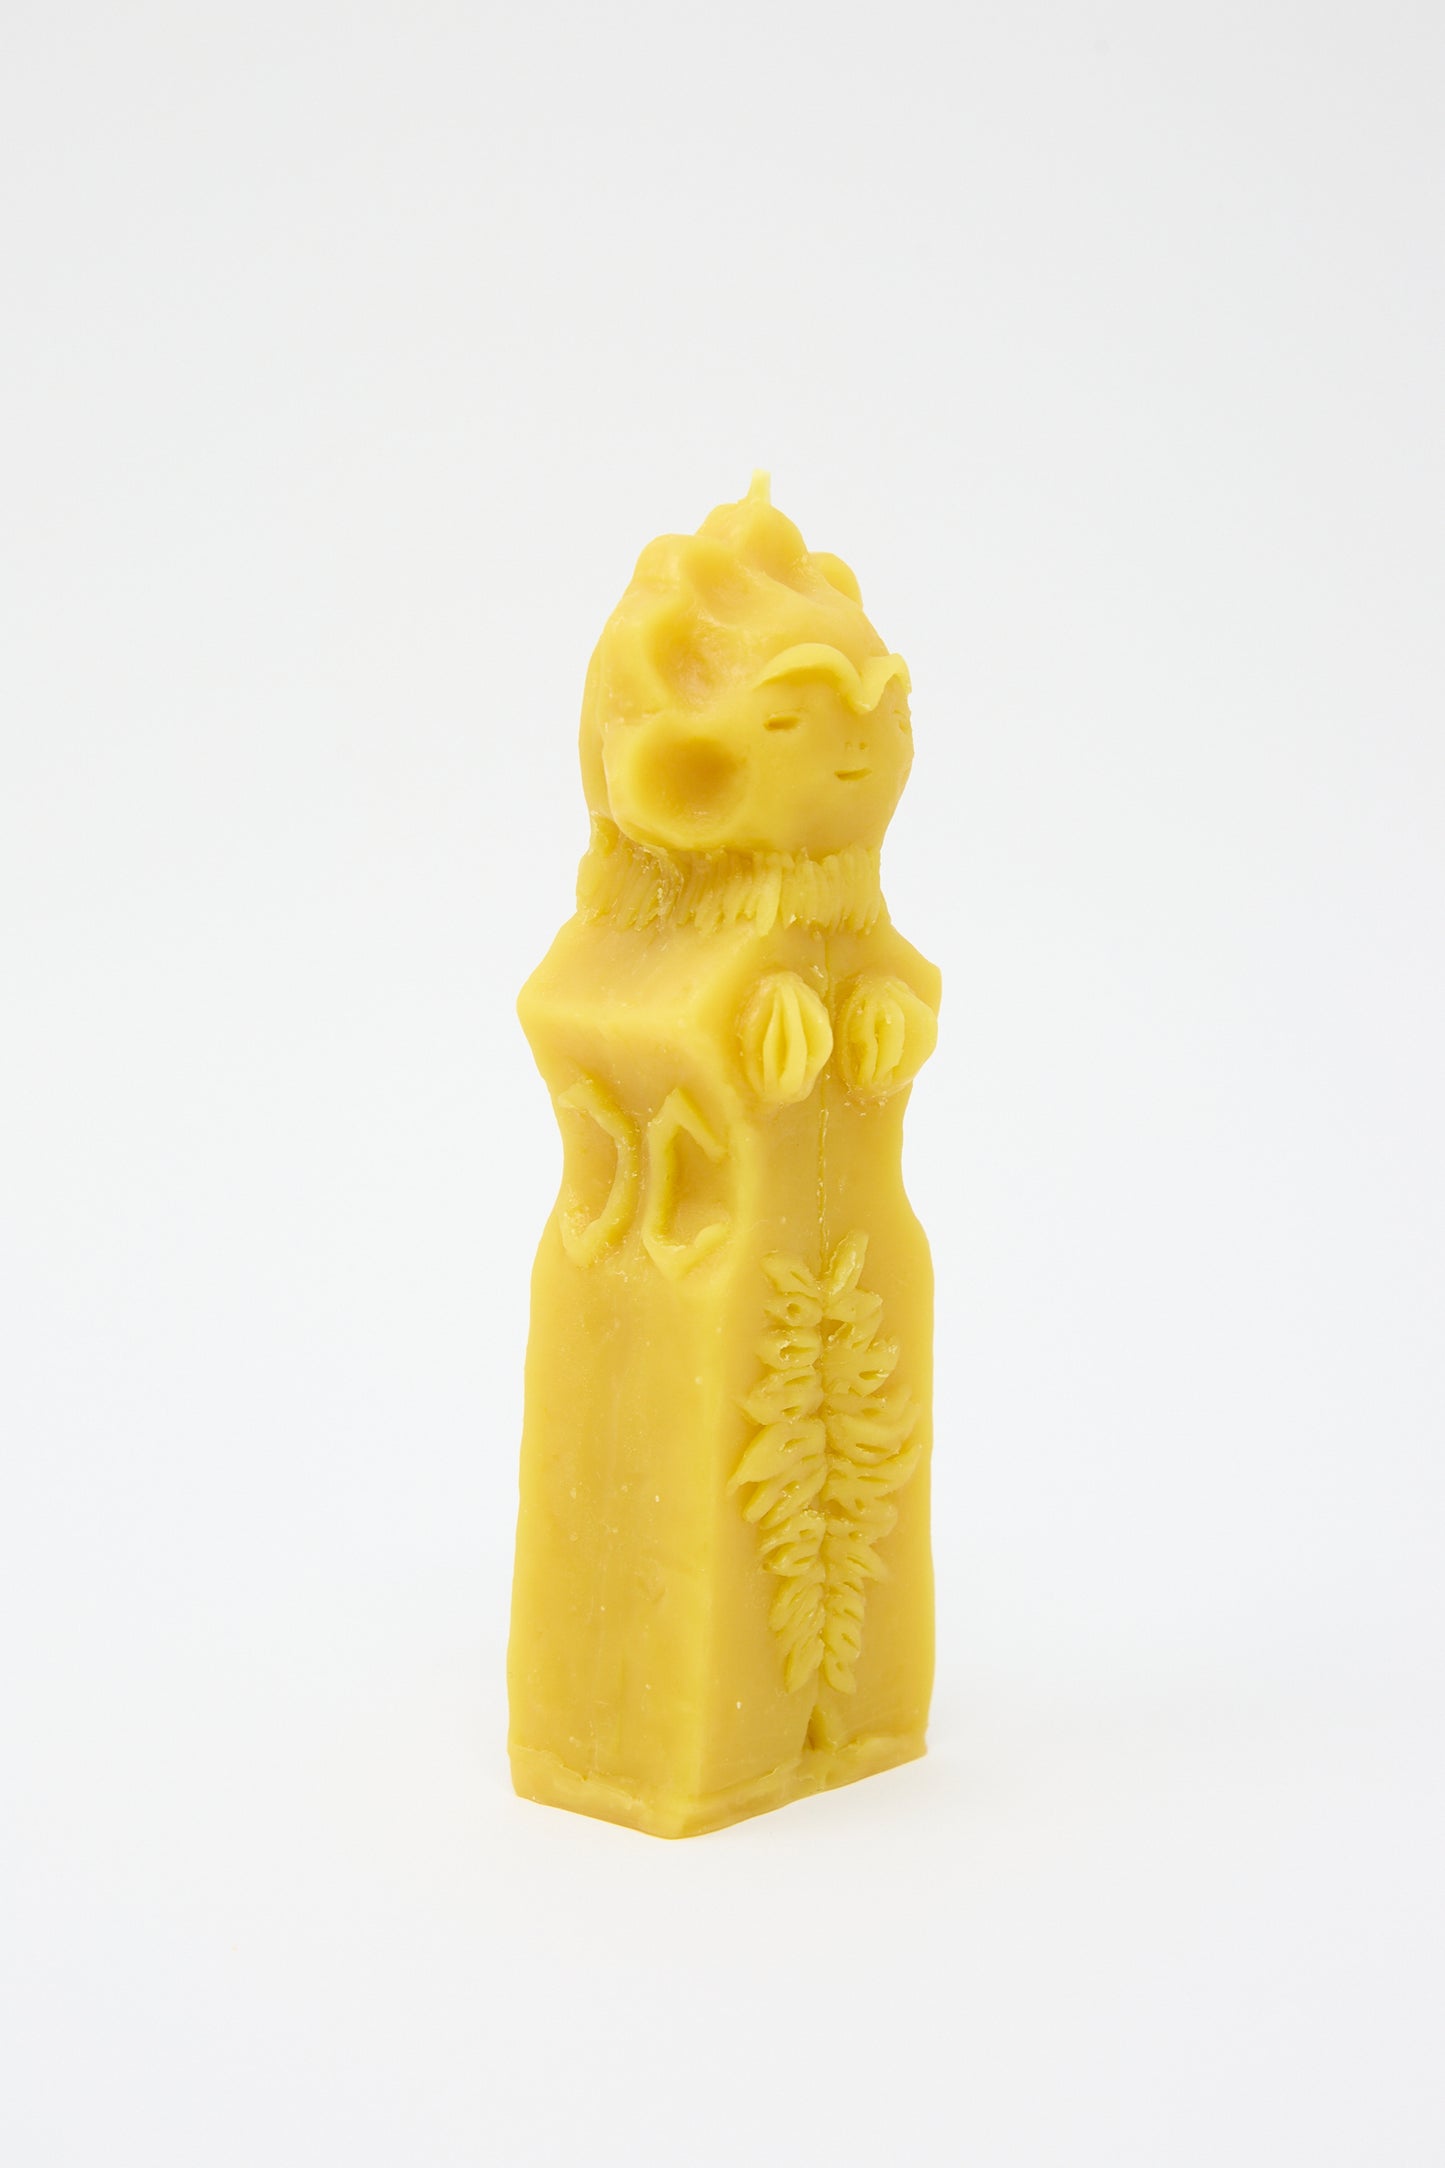 A yellow Moon Goddess Candle shaped like a cat wearing a regal robe and crown, hand formed and set against a white background by Rinn to Hitsuji.